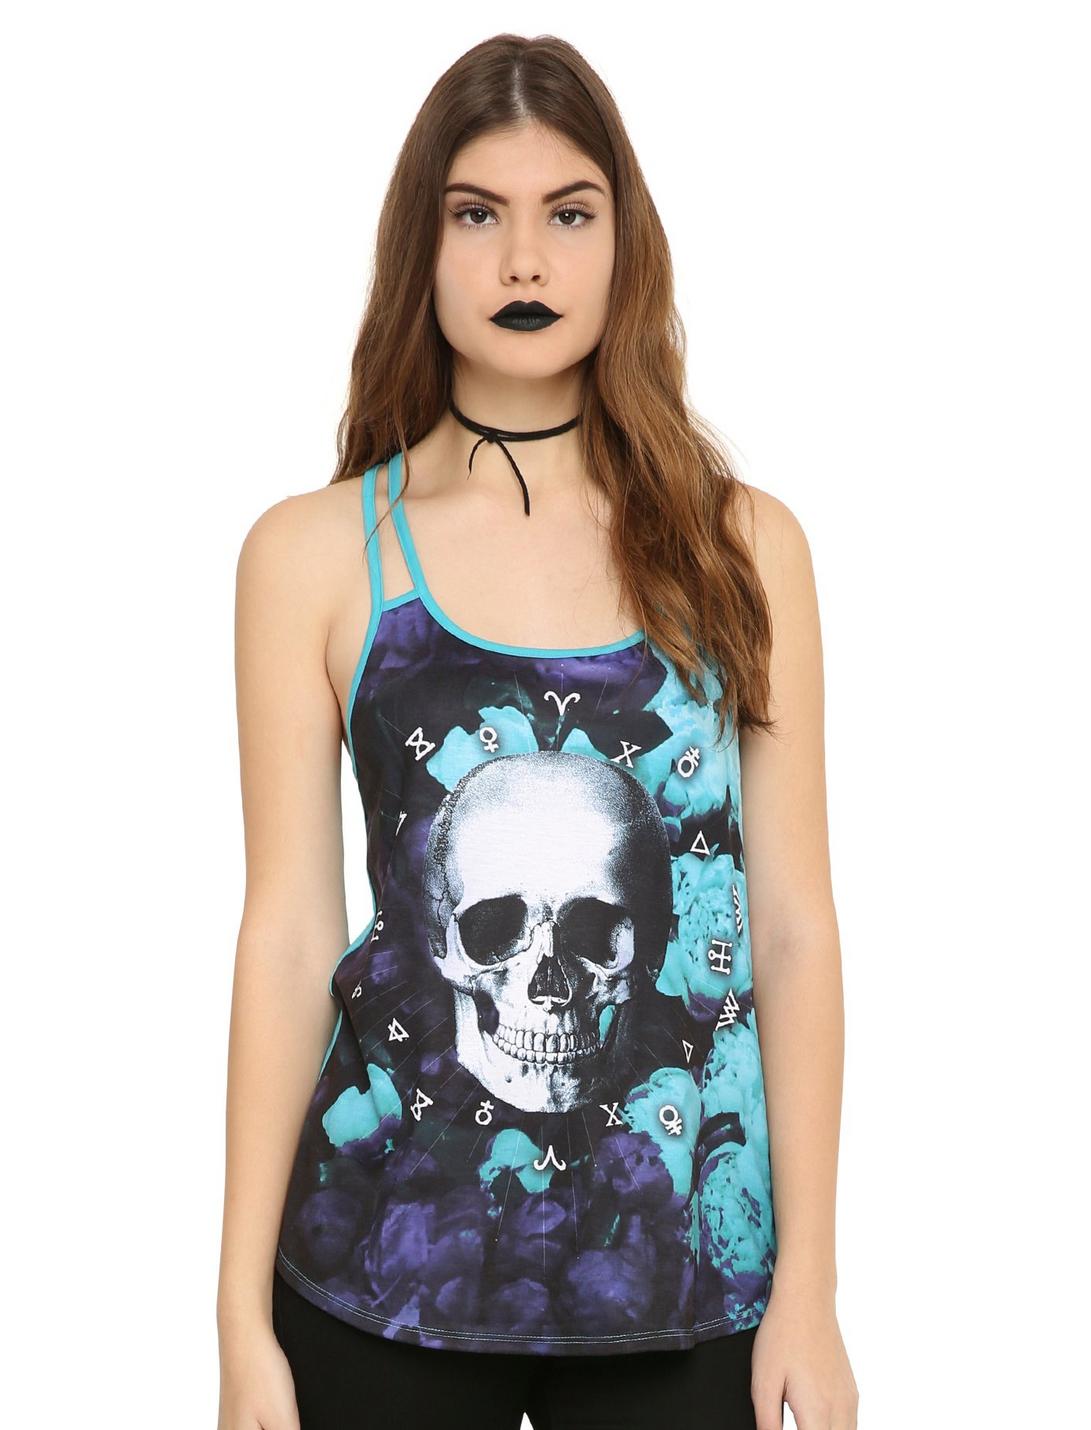 Turquoise Celestial Skull Double Strap Girls Tank Top, TURQUOISE, hi-res